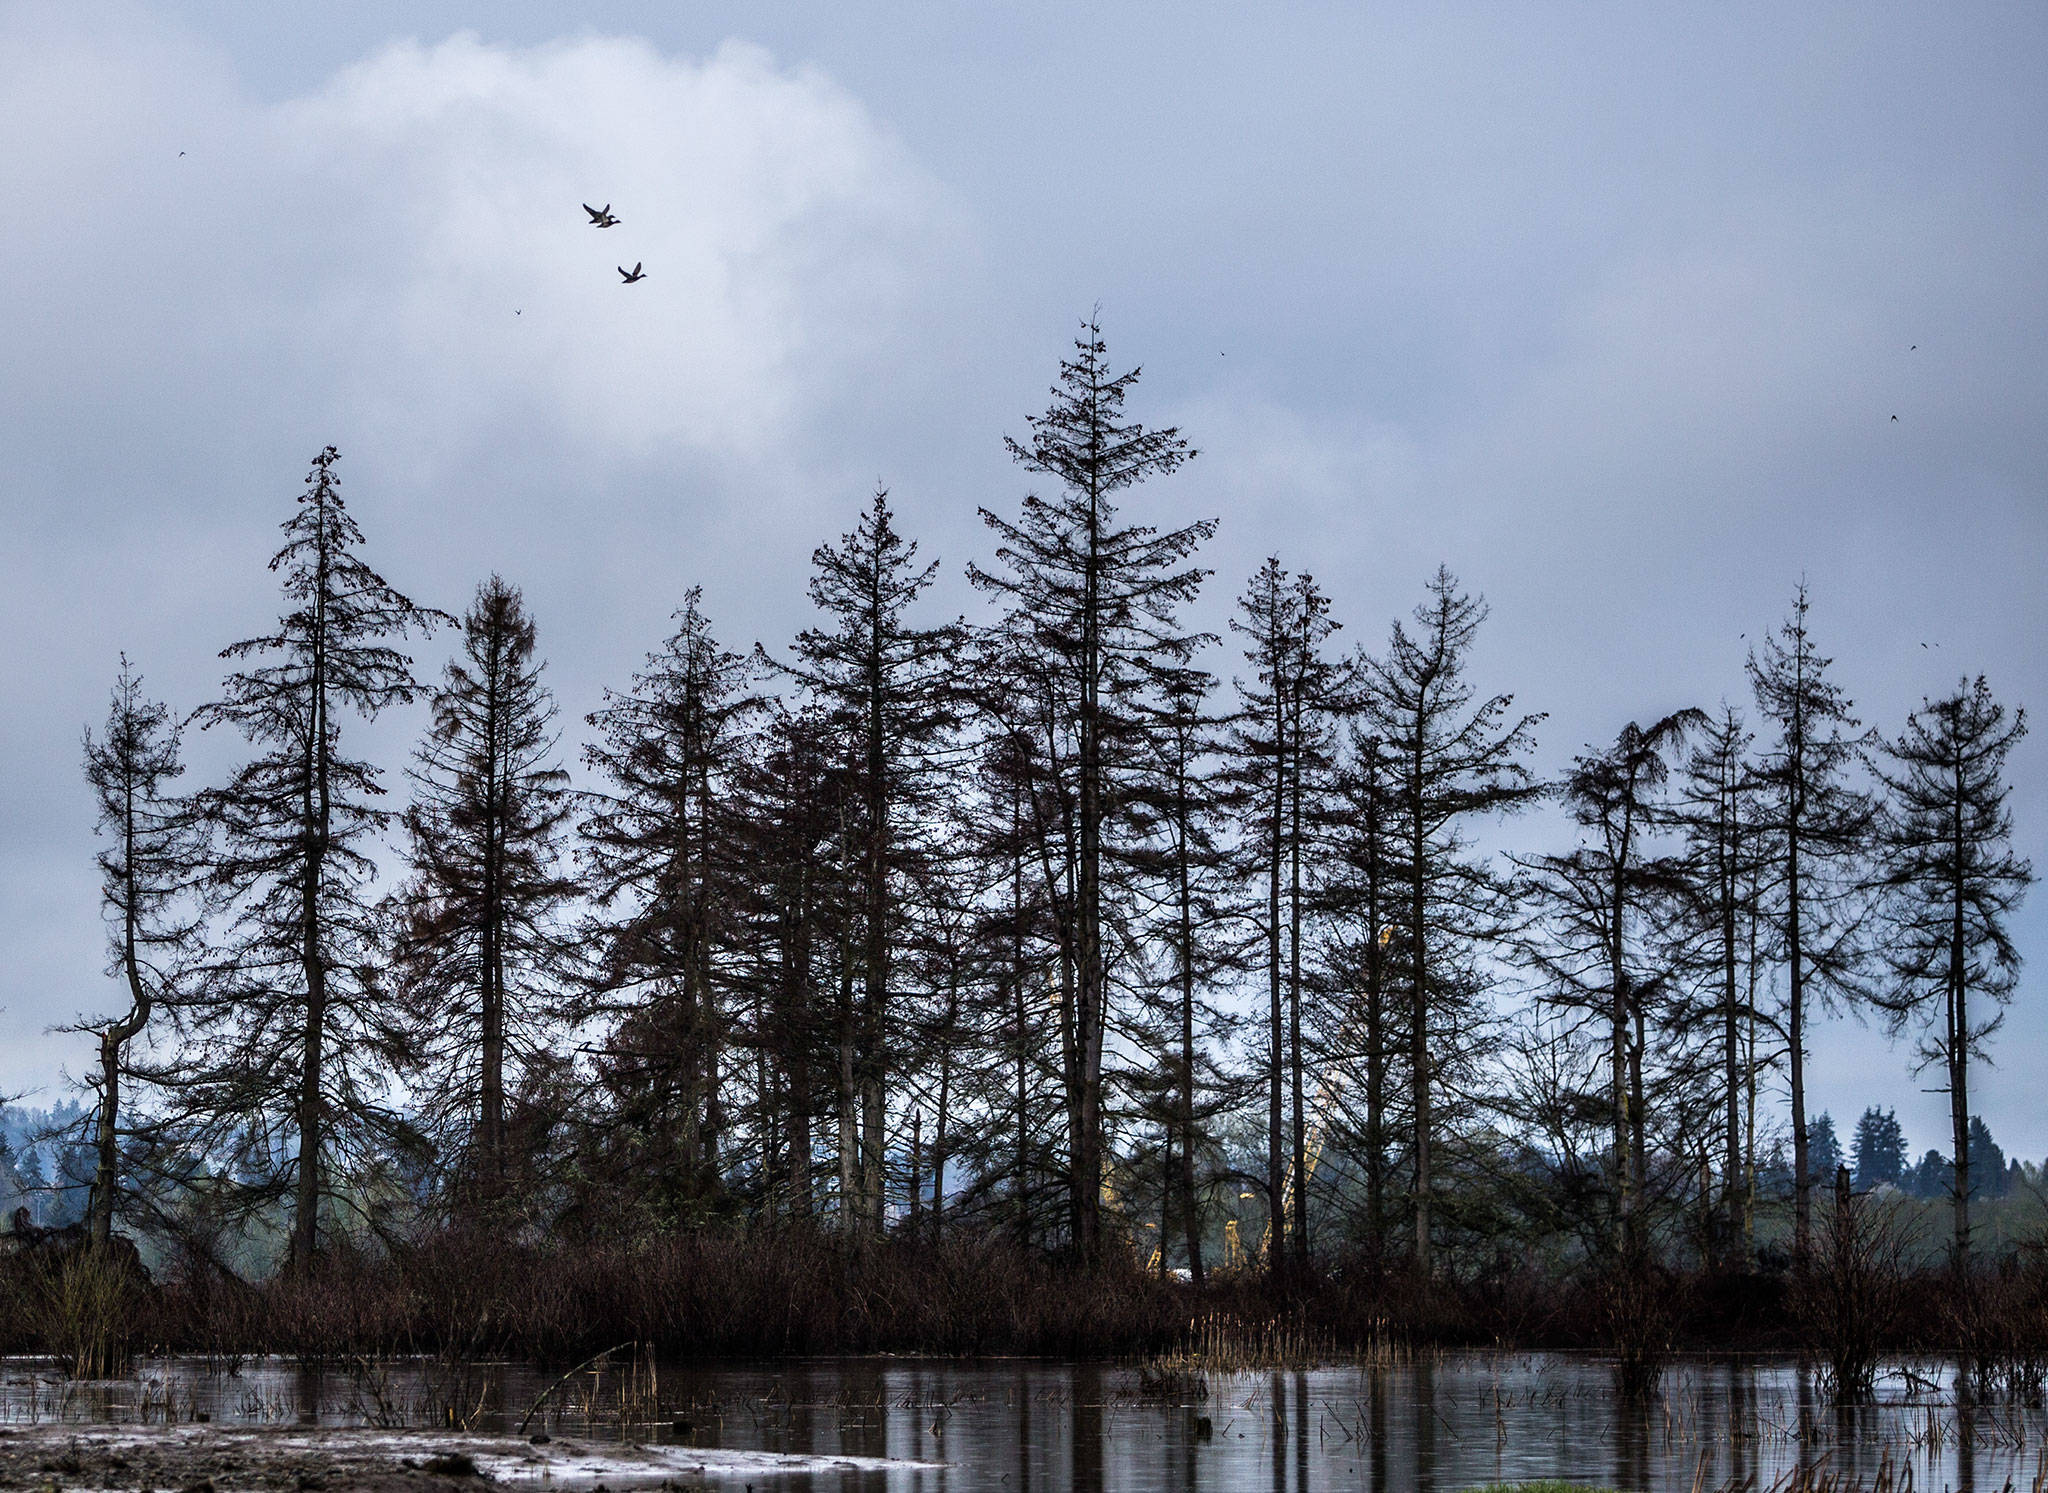 Ducks fly above the recently restored wetland area of Smith Island along Union Slough on April 11 in Everett. (Olivia Vanni / The Herald)